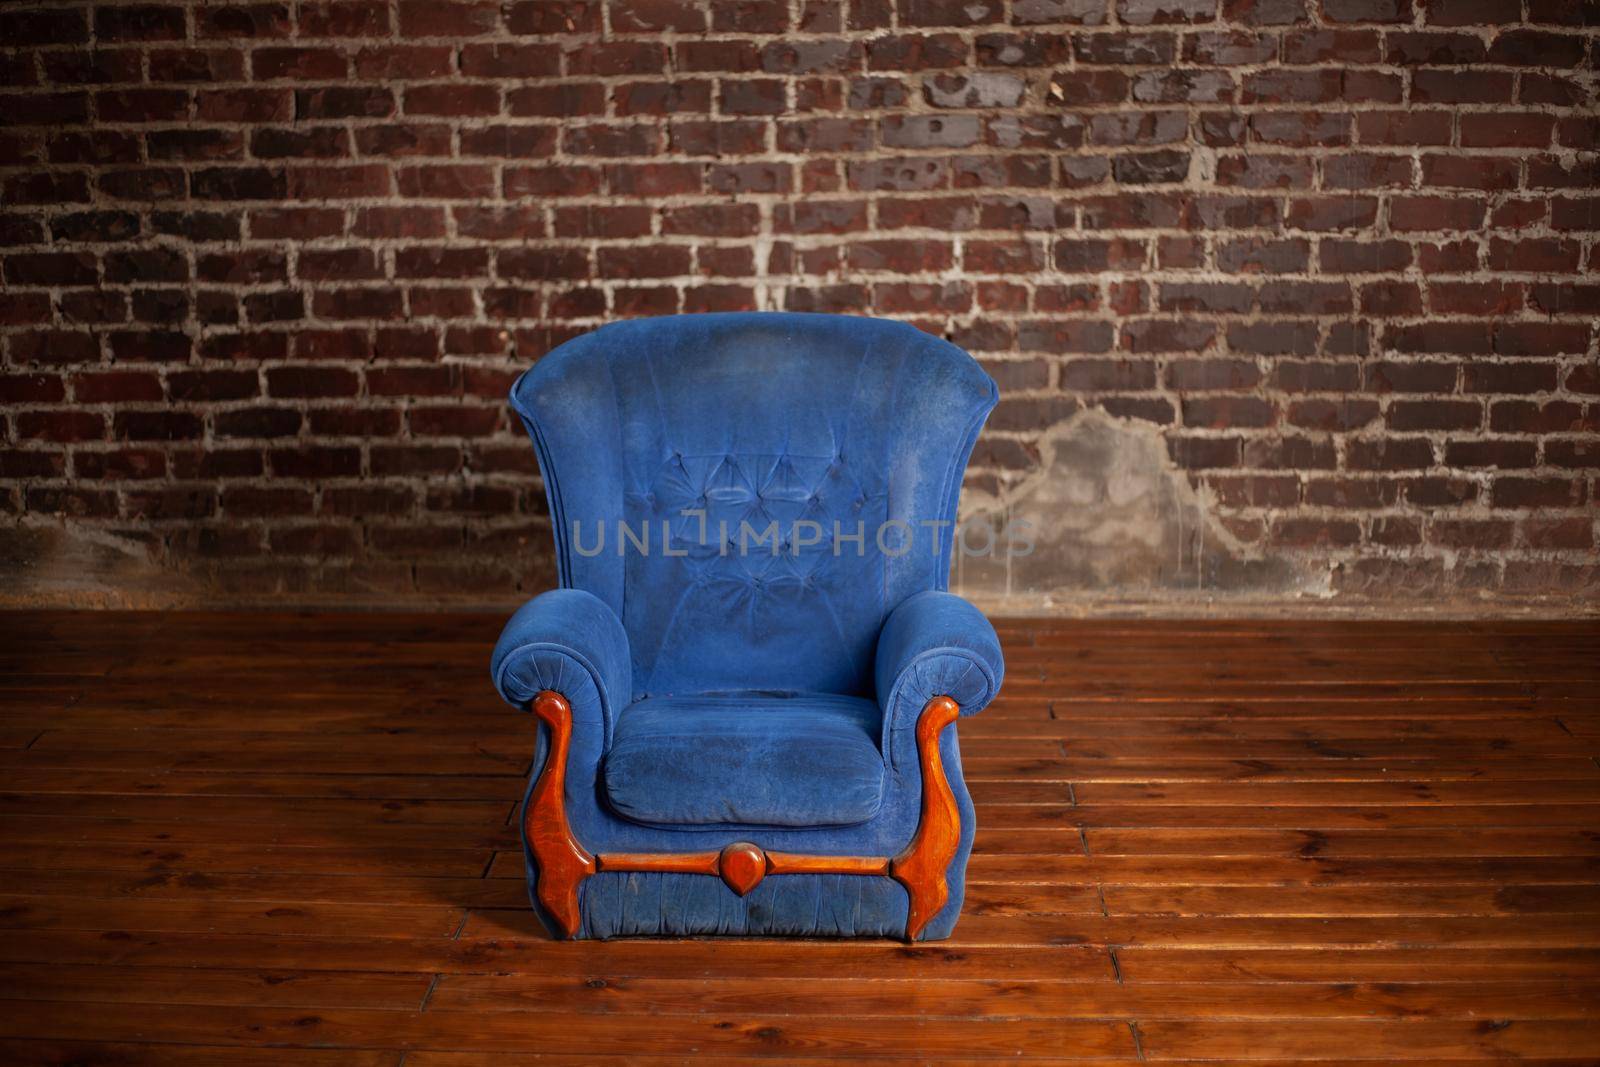 Old dirty vintage blue armchair standing indoor with red brick wall on background